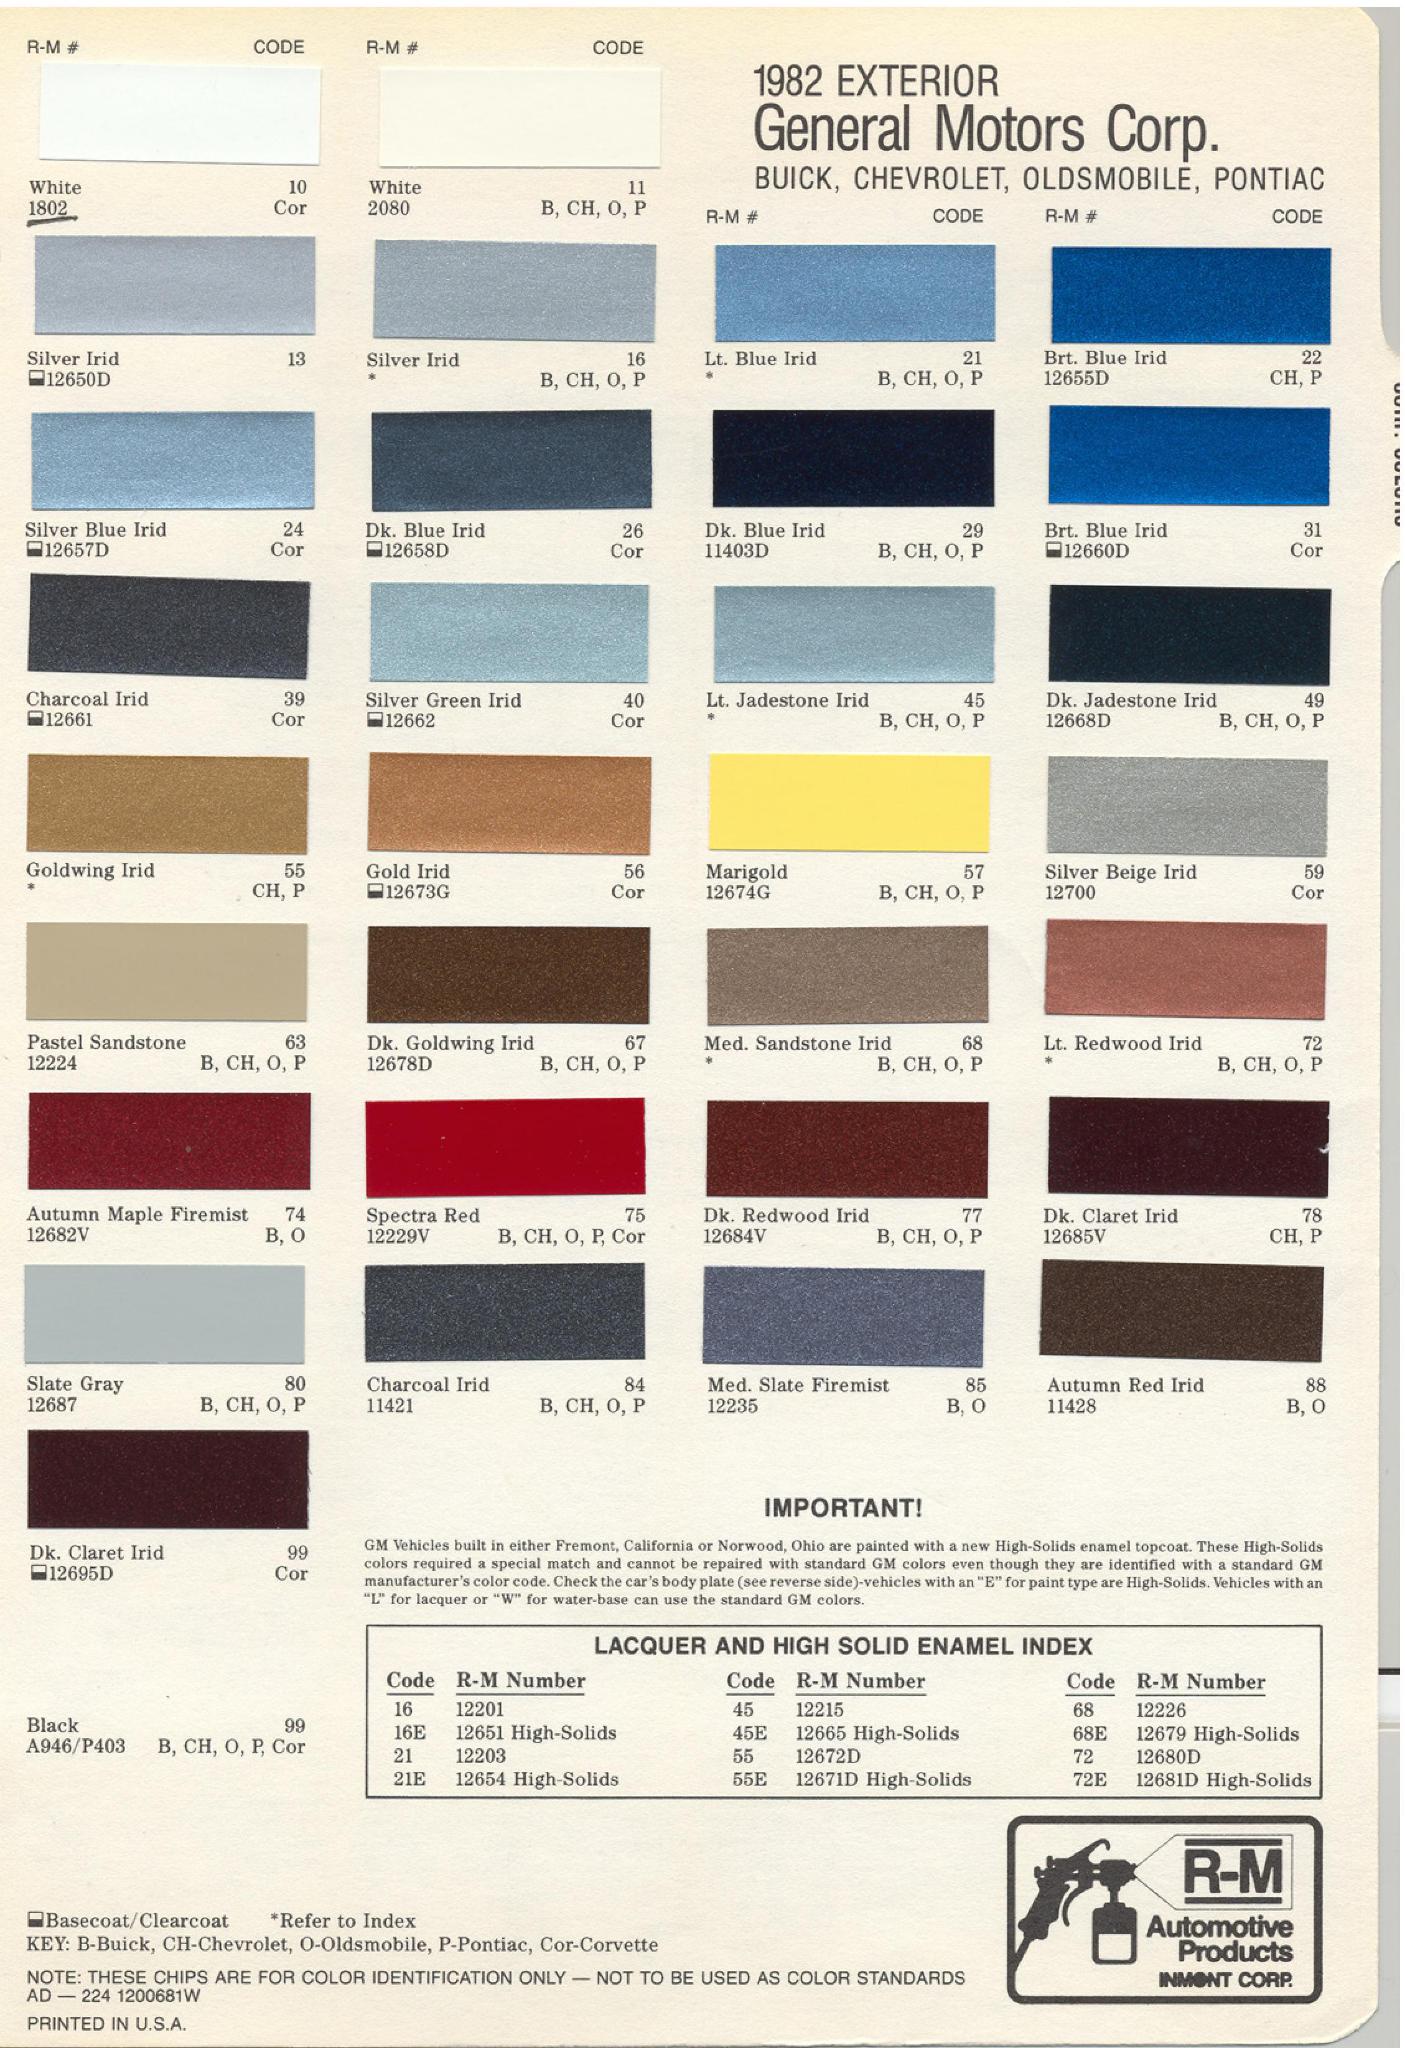 Exterior Colors and Codes used on Pontiac, Chevrolet, Oldsmobile, and Buick Vehicles